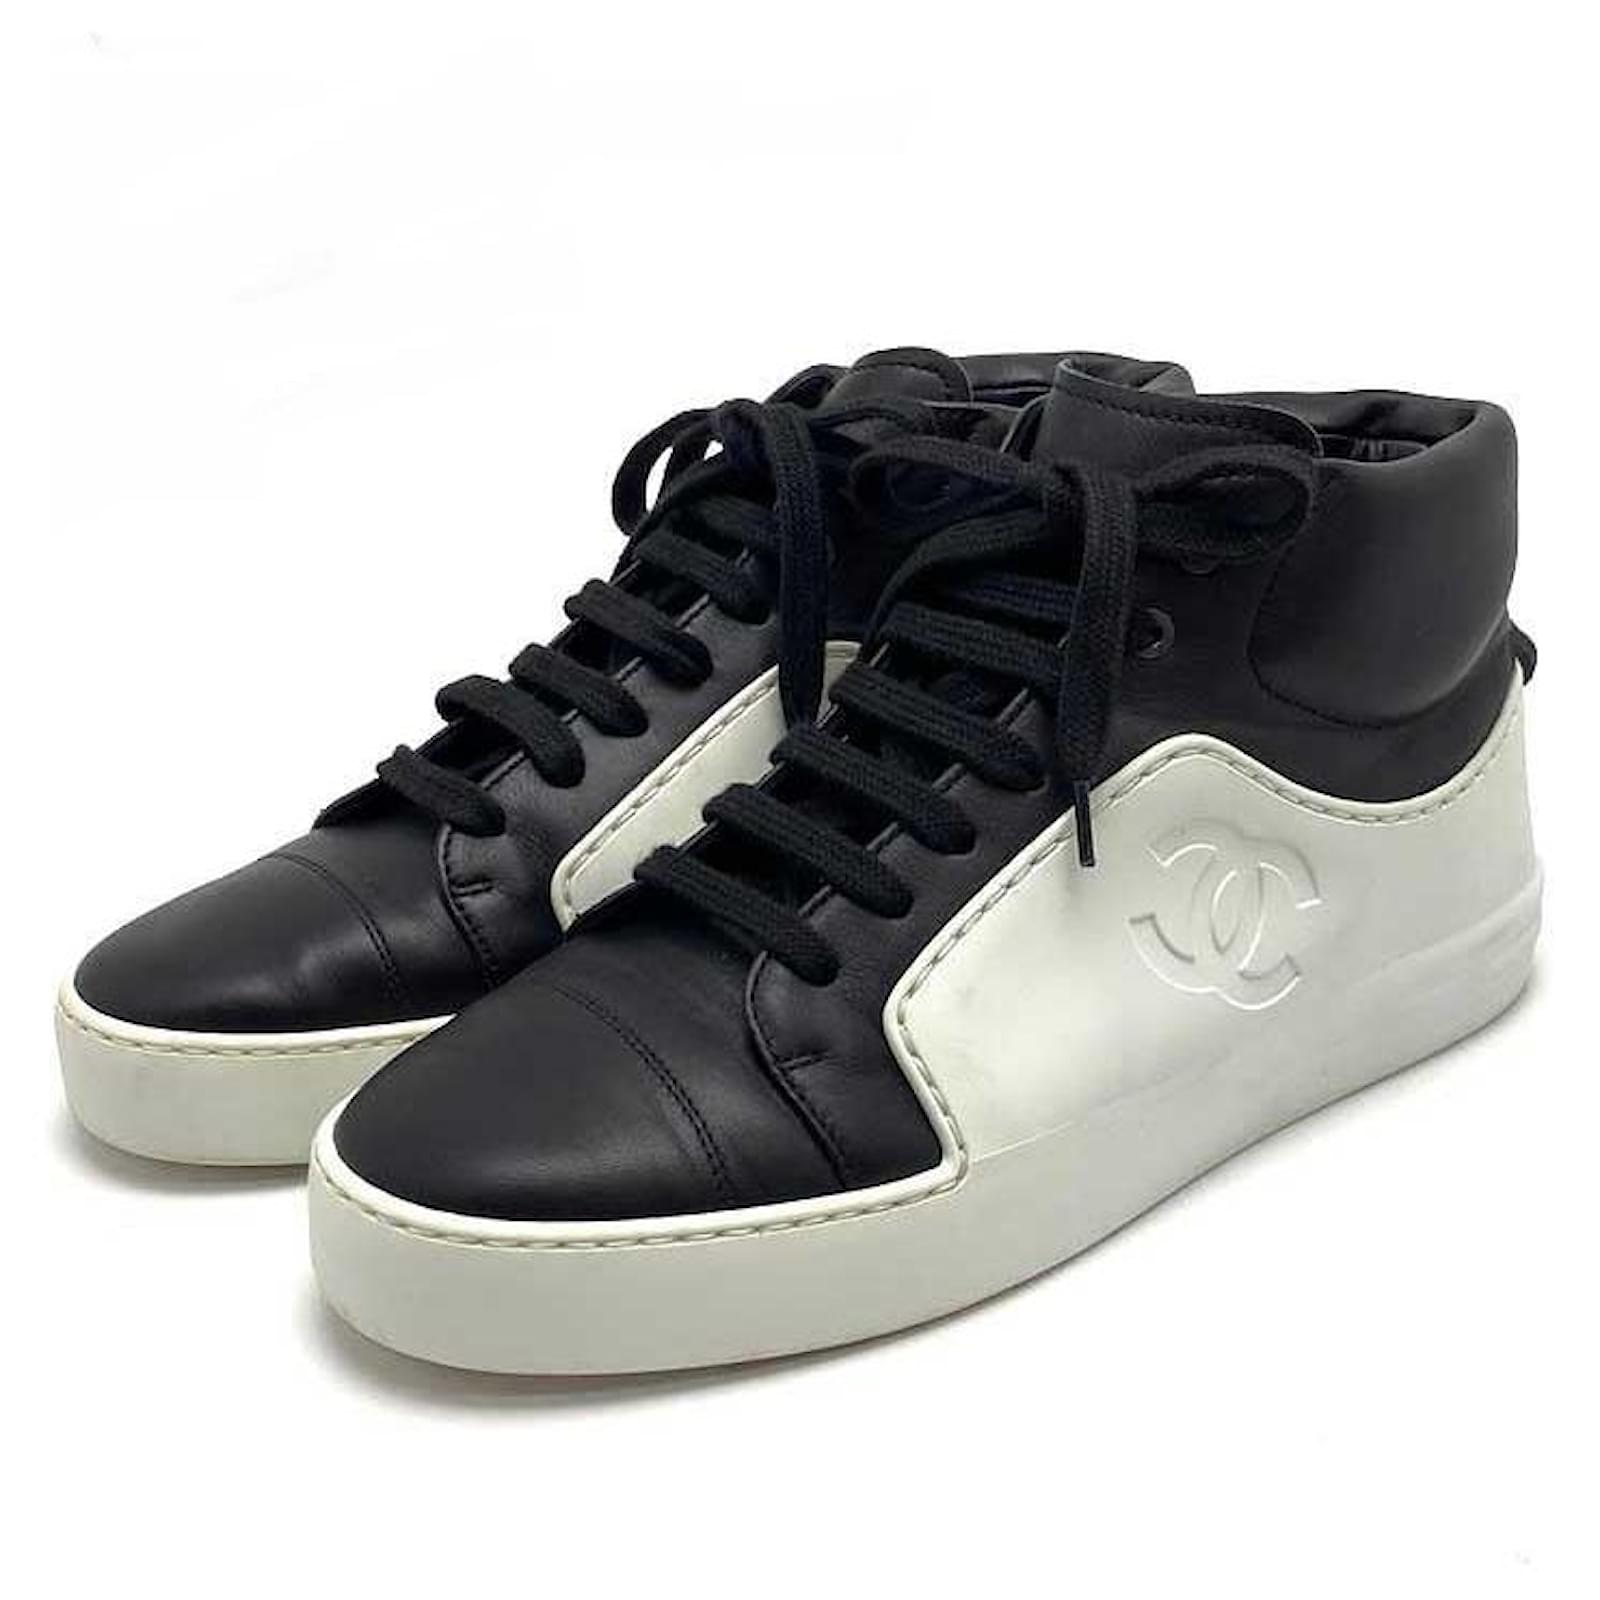 Used] CHANEL high-top sneakers white black leather rubber # 37 CC mark 17SS  ref.432979 - Joli Closet